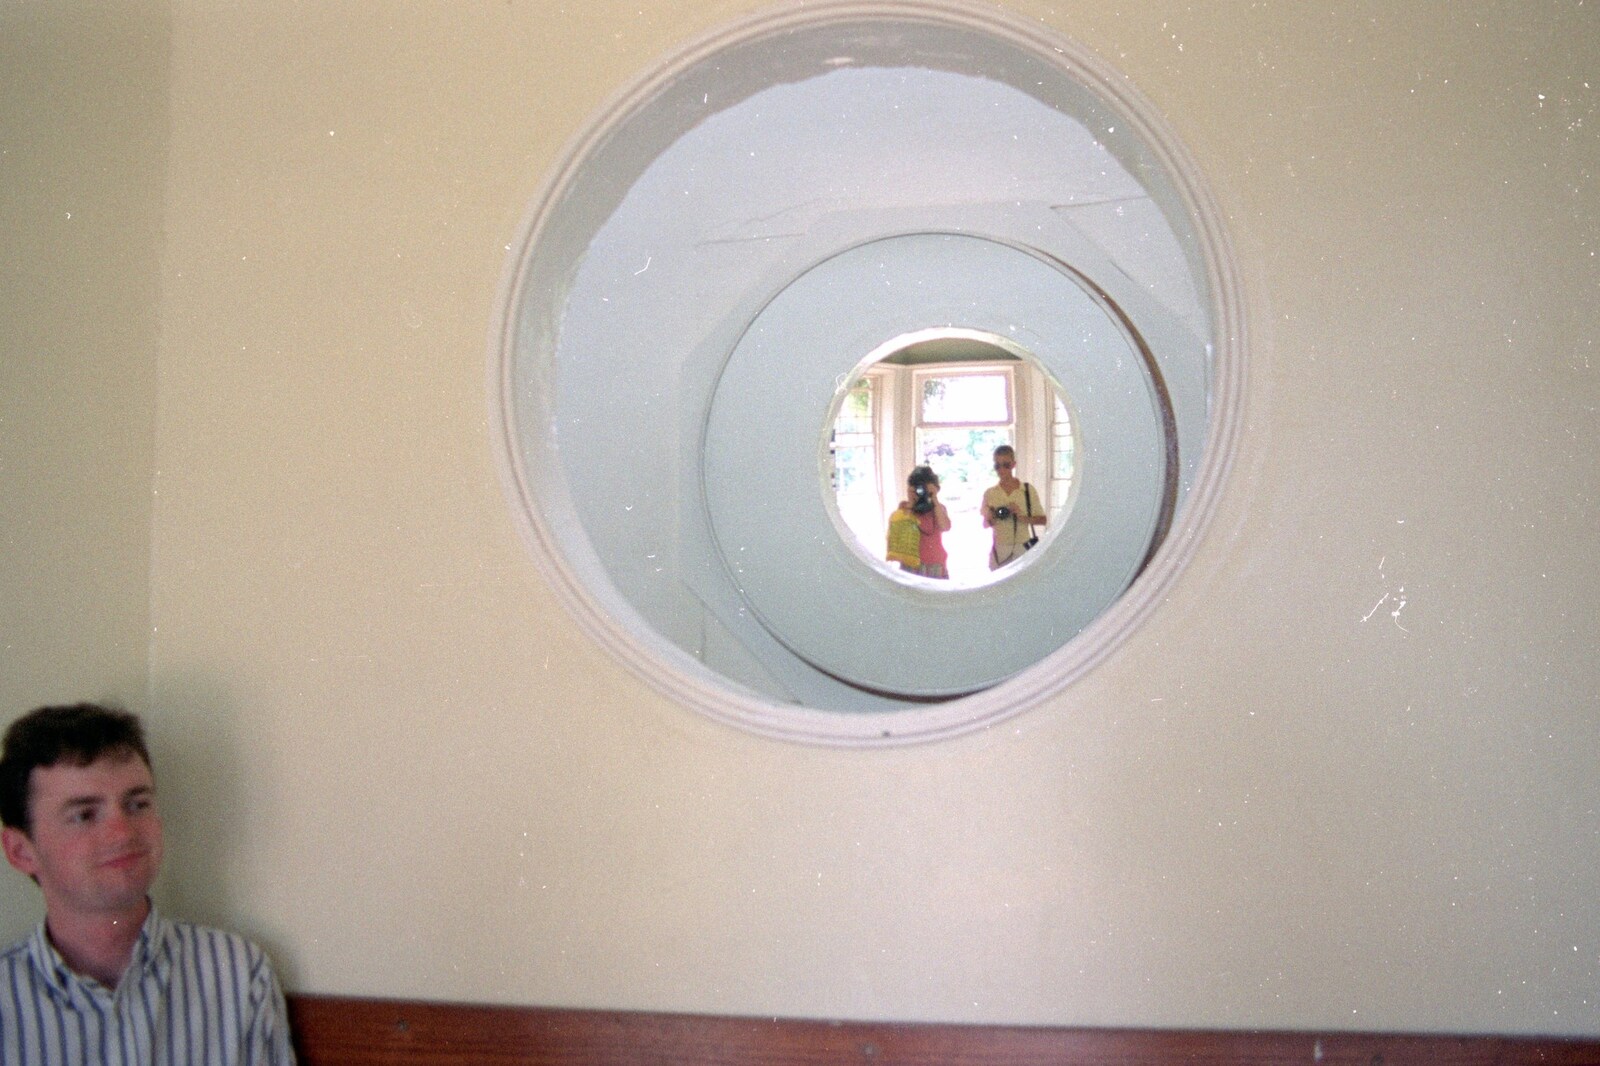 People are reflected in a mirror from Uni: A Trip to Mount Edgcumbe, Cornwall - 17th June 1989